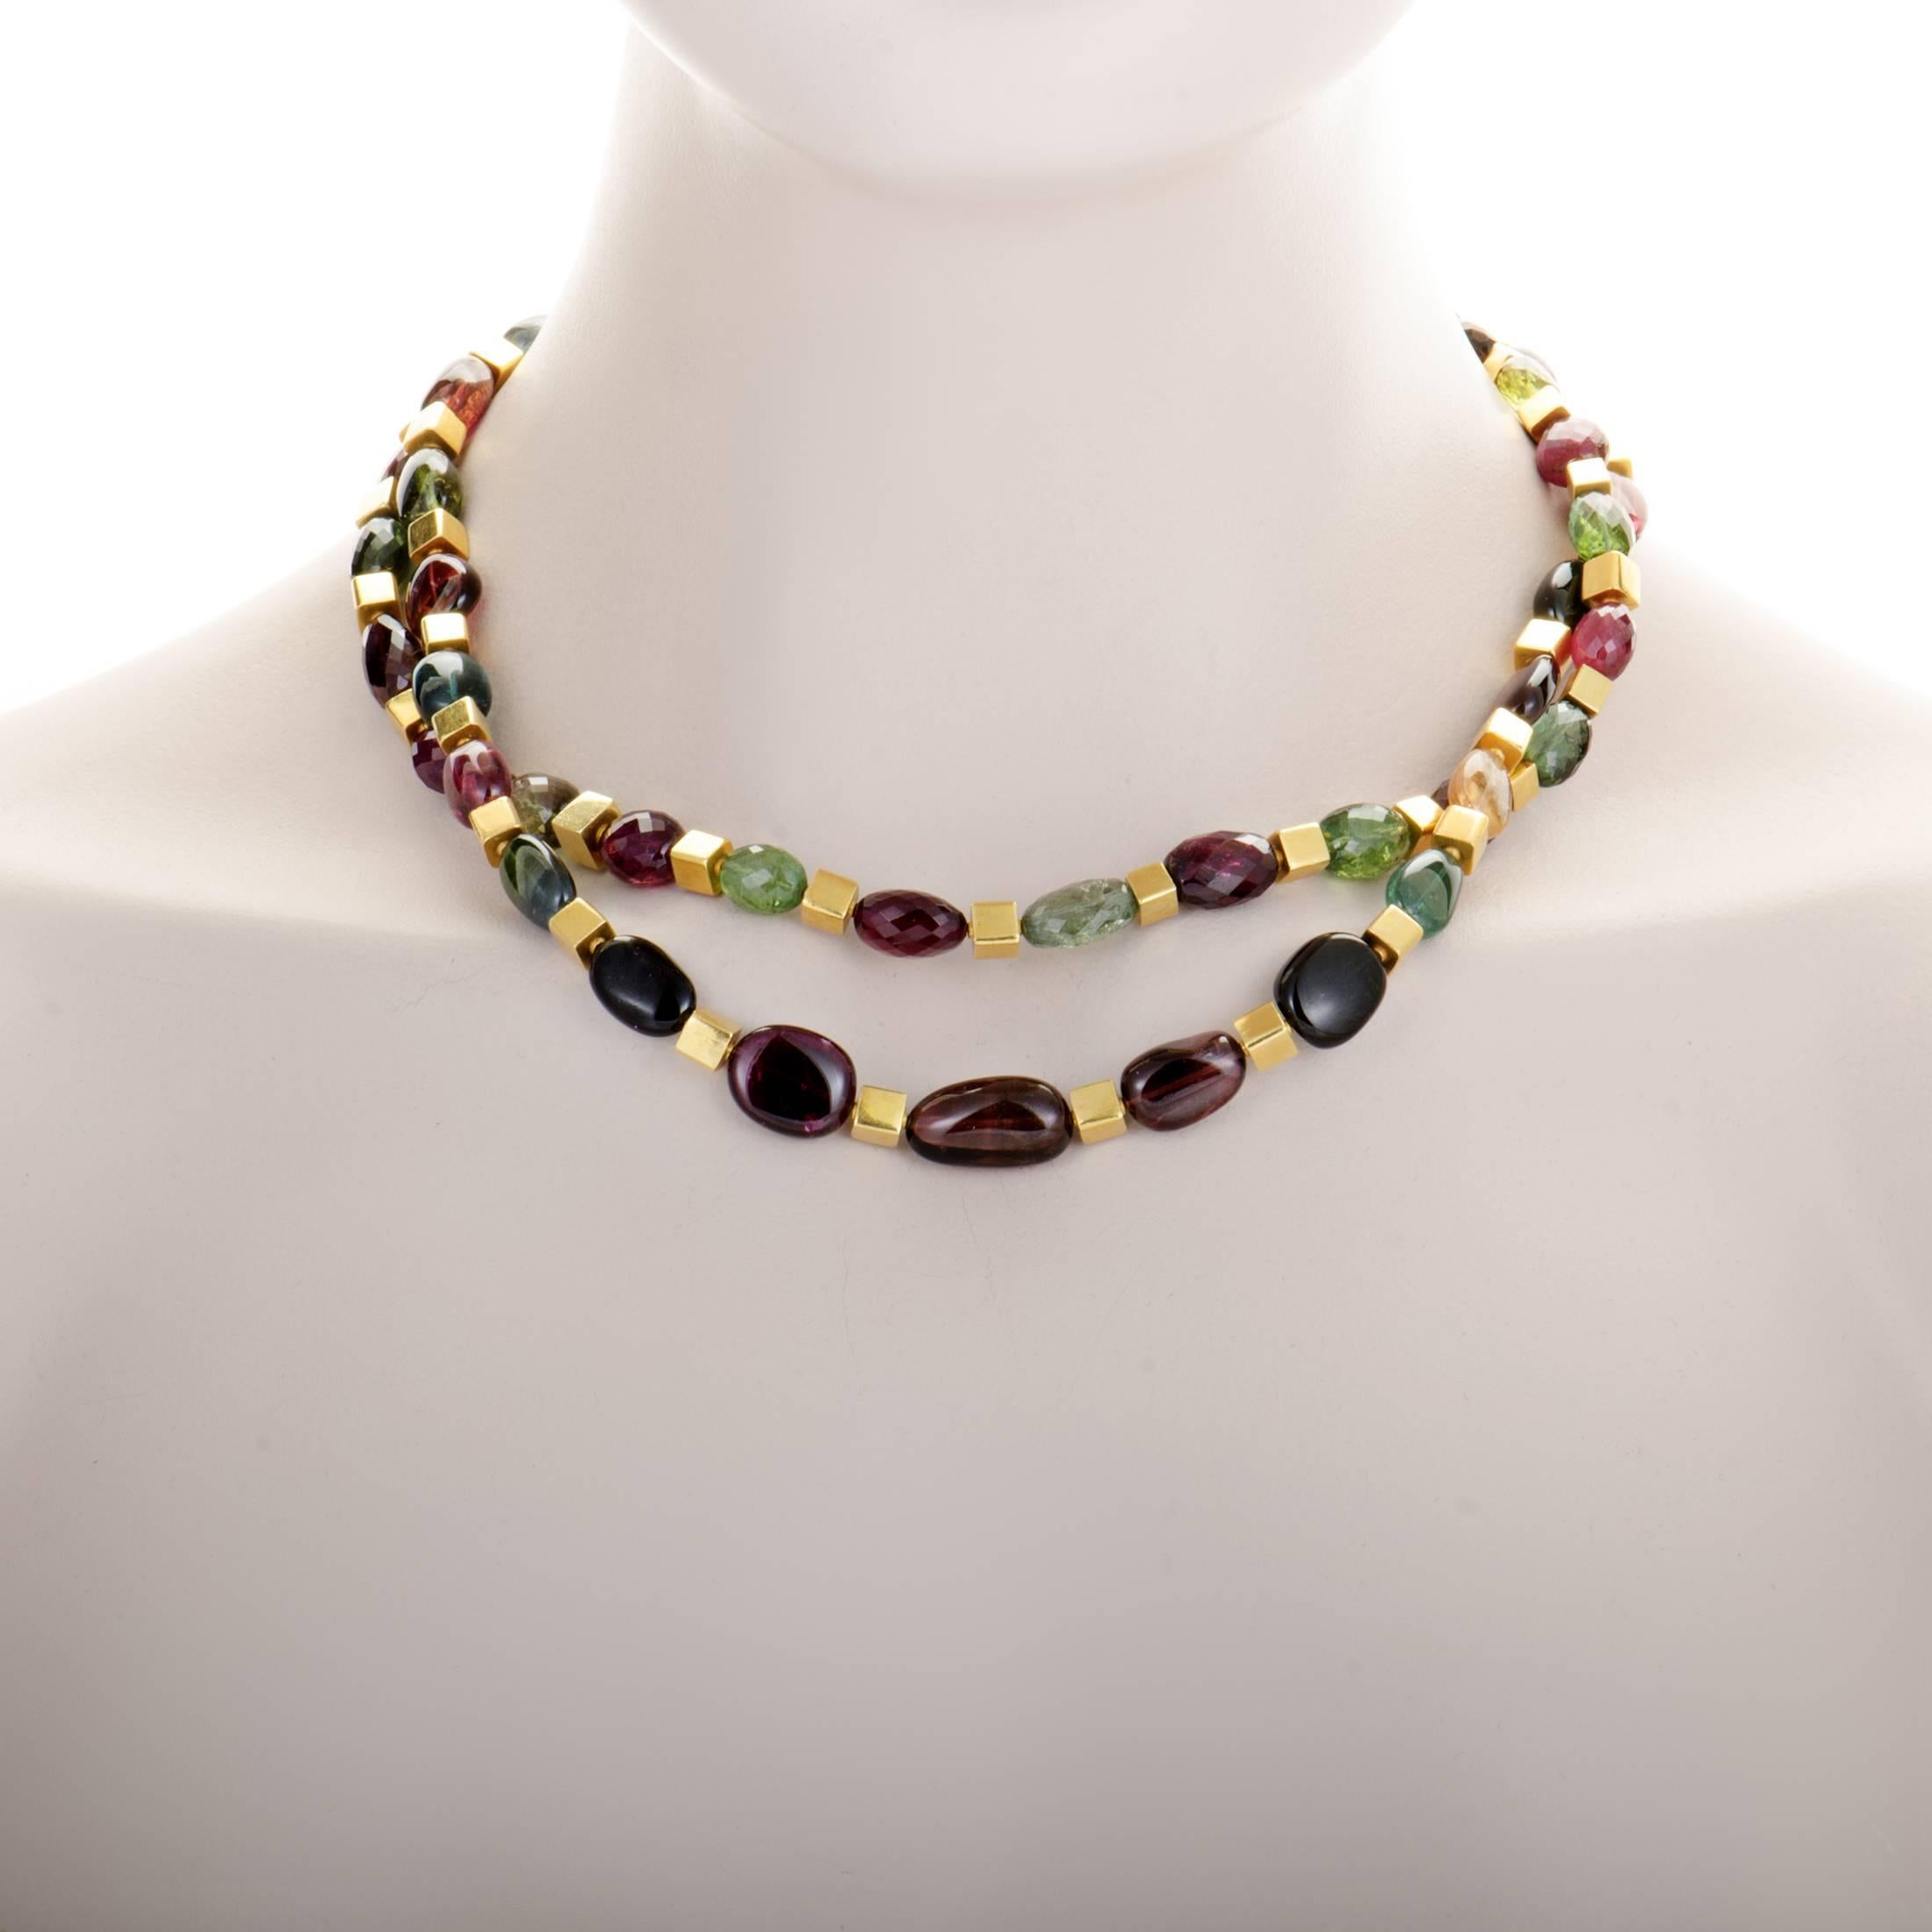 Enriching the fabulous nuance of prestigious 20K yellow gold with vivacious colors of diversely toned tourmaline stones, this magnificent necklace offers a sight of tasteful flamboyance, exuberant femininity and offbeat style.